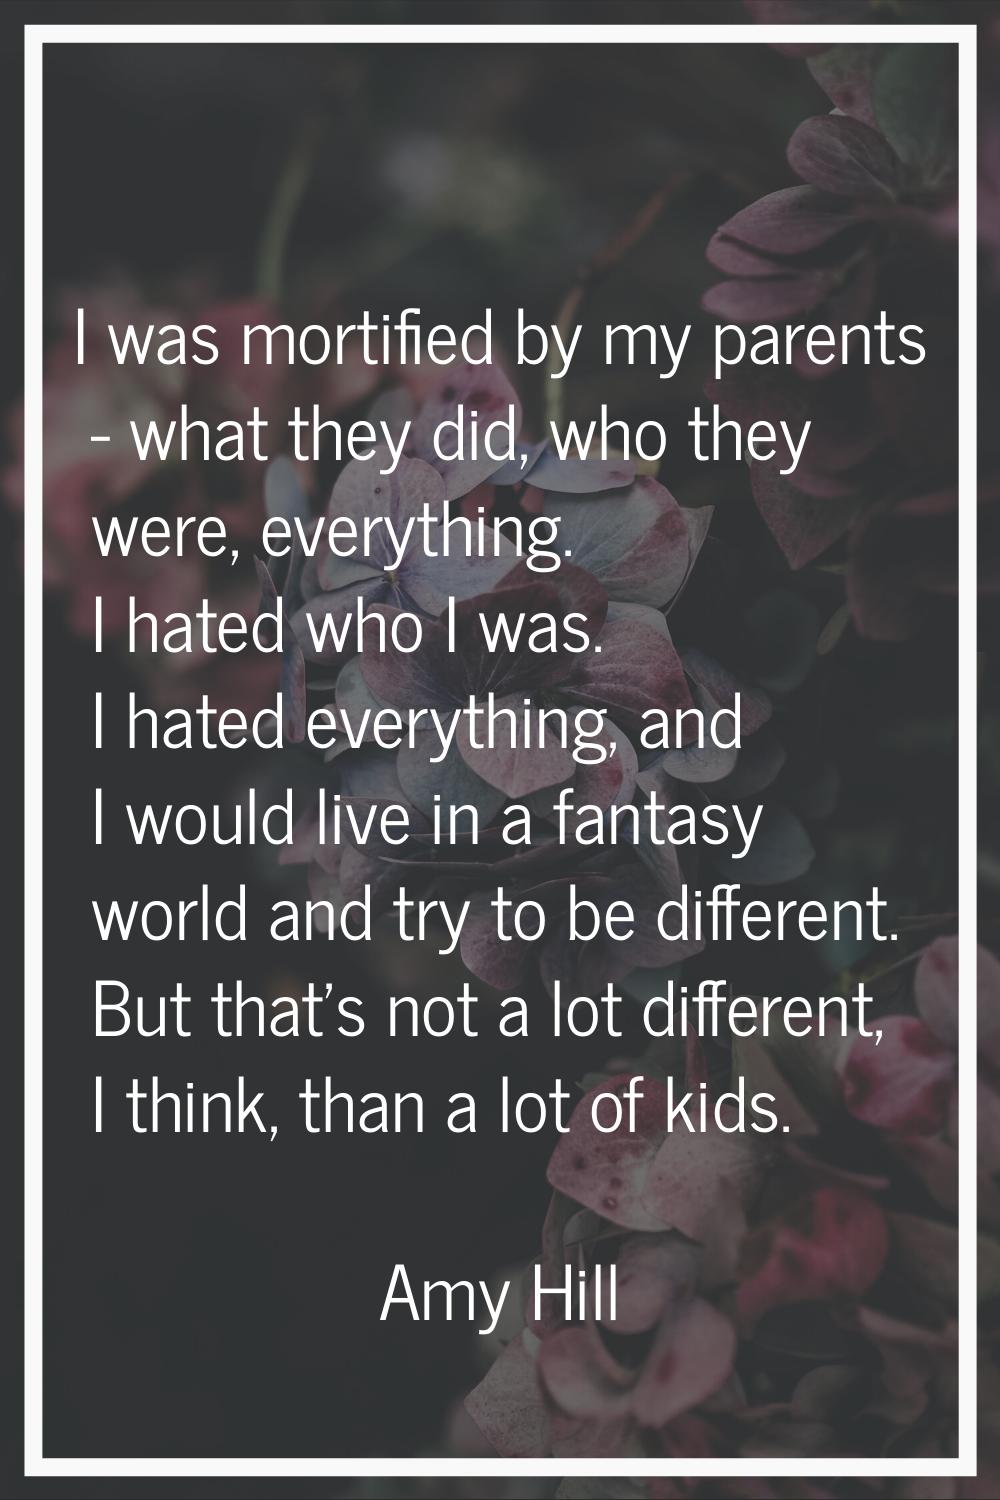 I was mortified by my parents - what they did, who they were, everything. I hated who I was. I hate